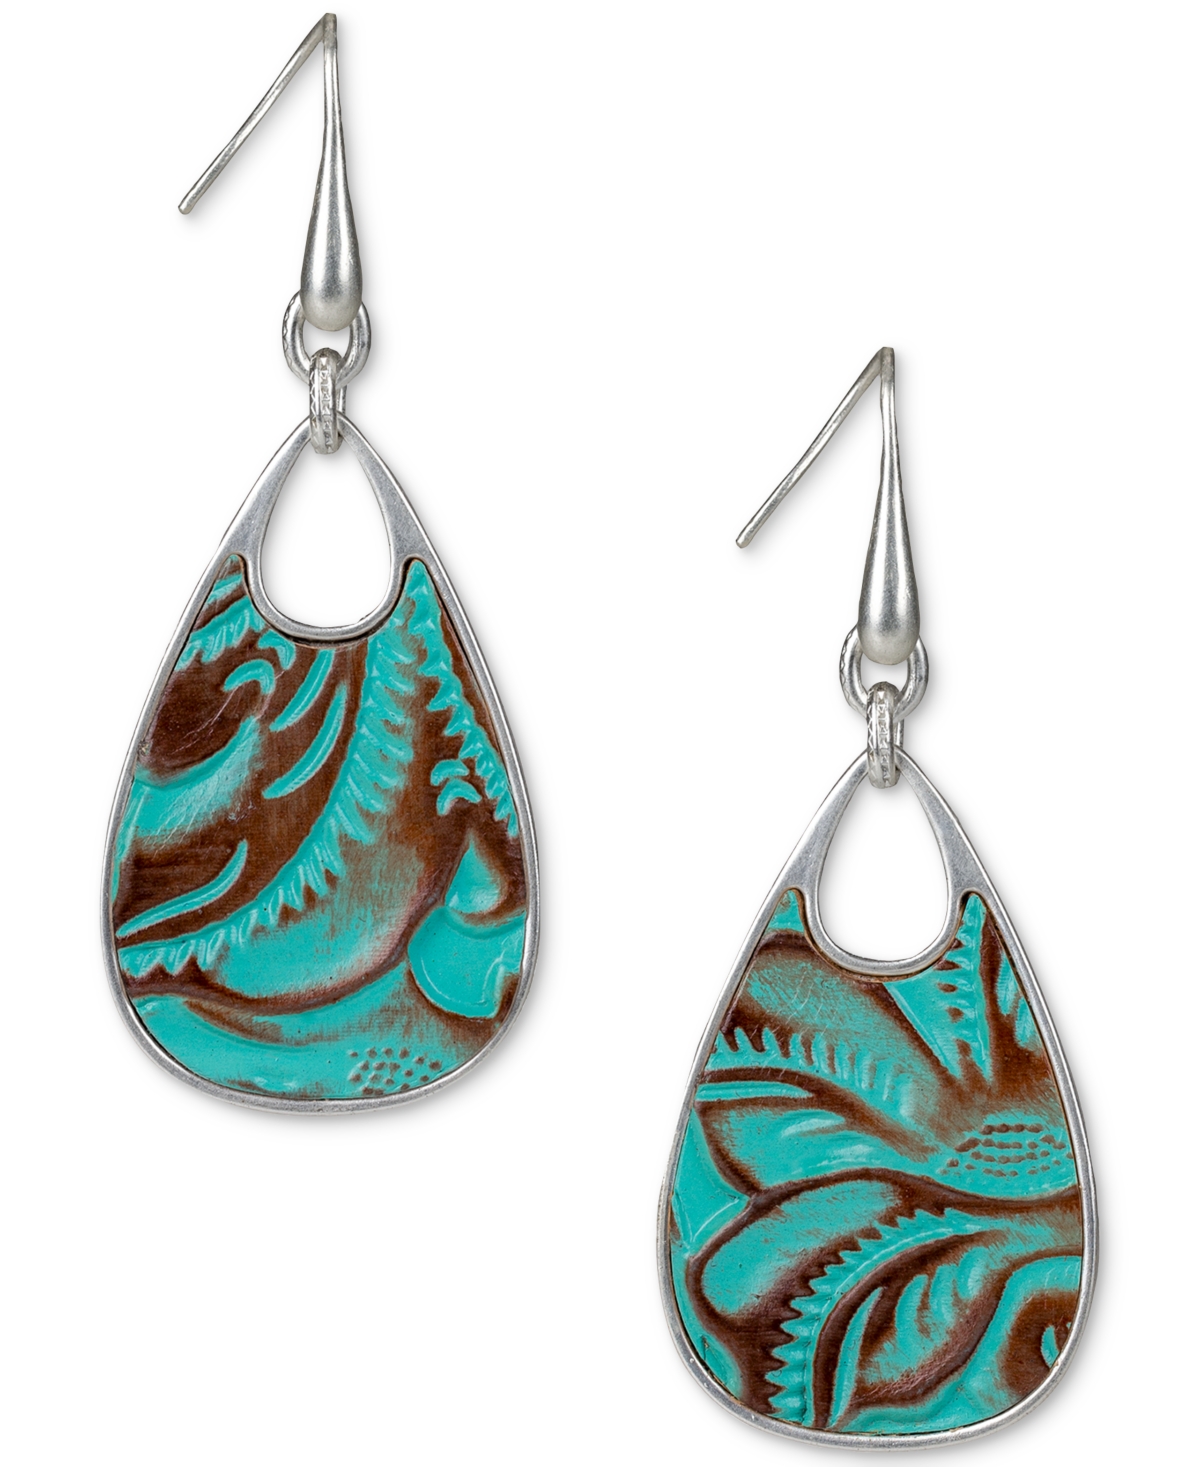 Silver-Tone Printed Leather Drop Earrings - Silver Ox